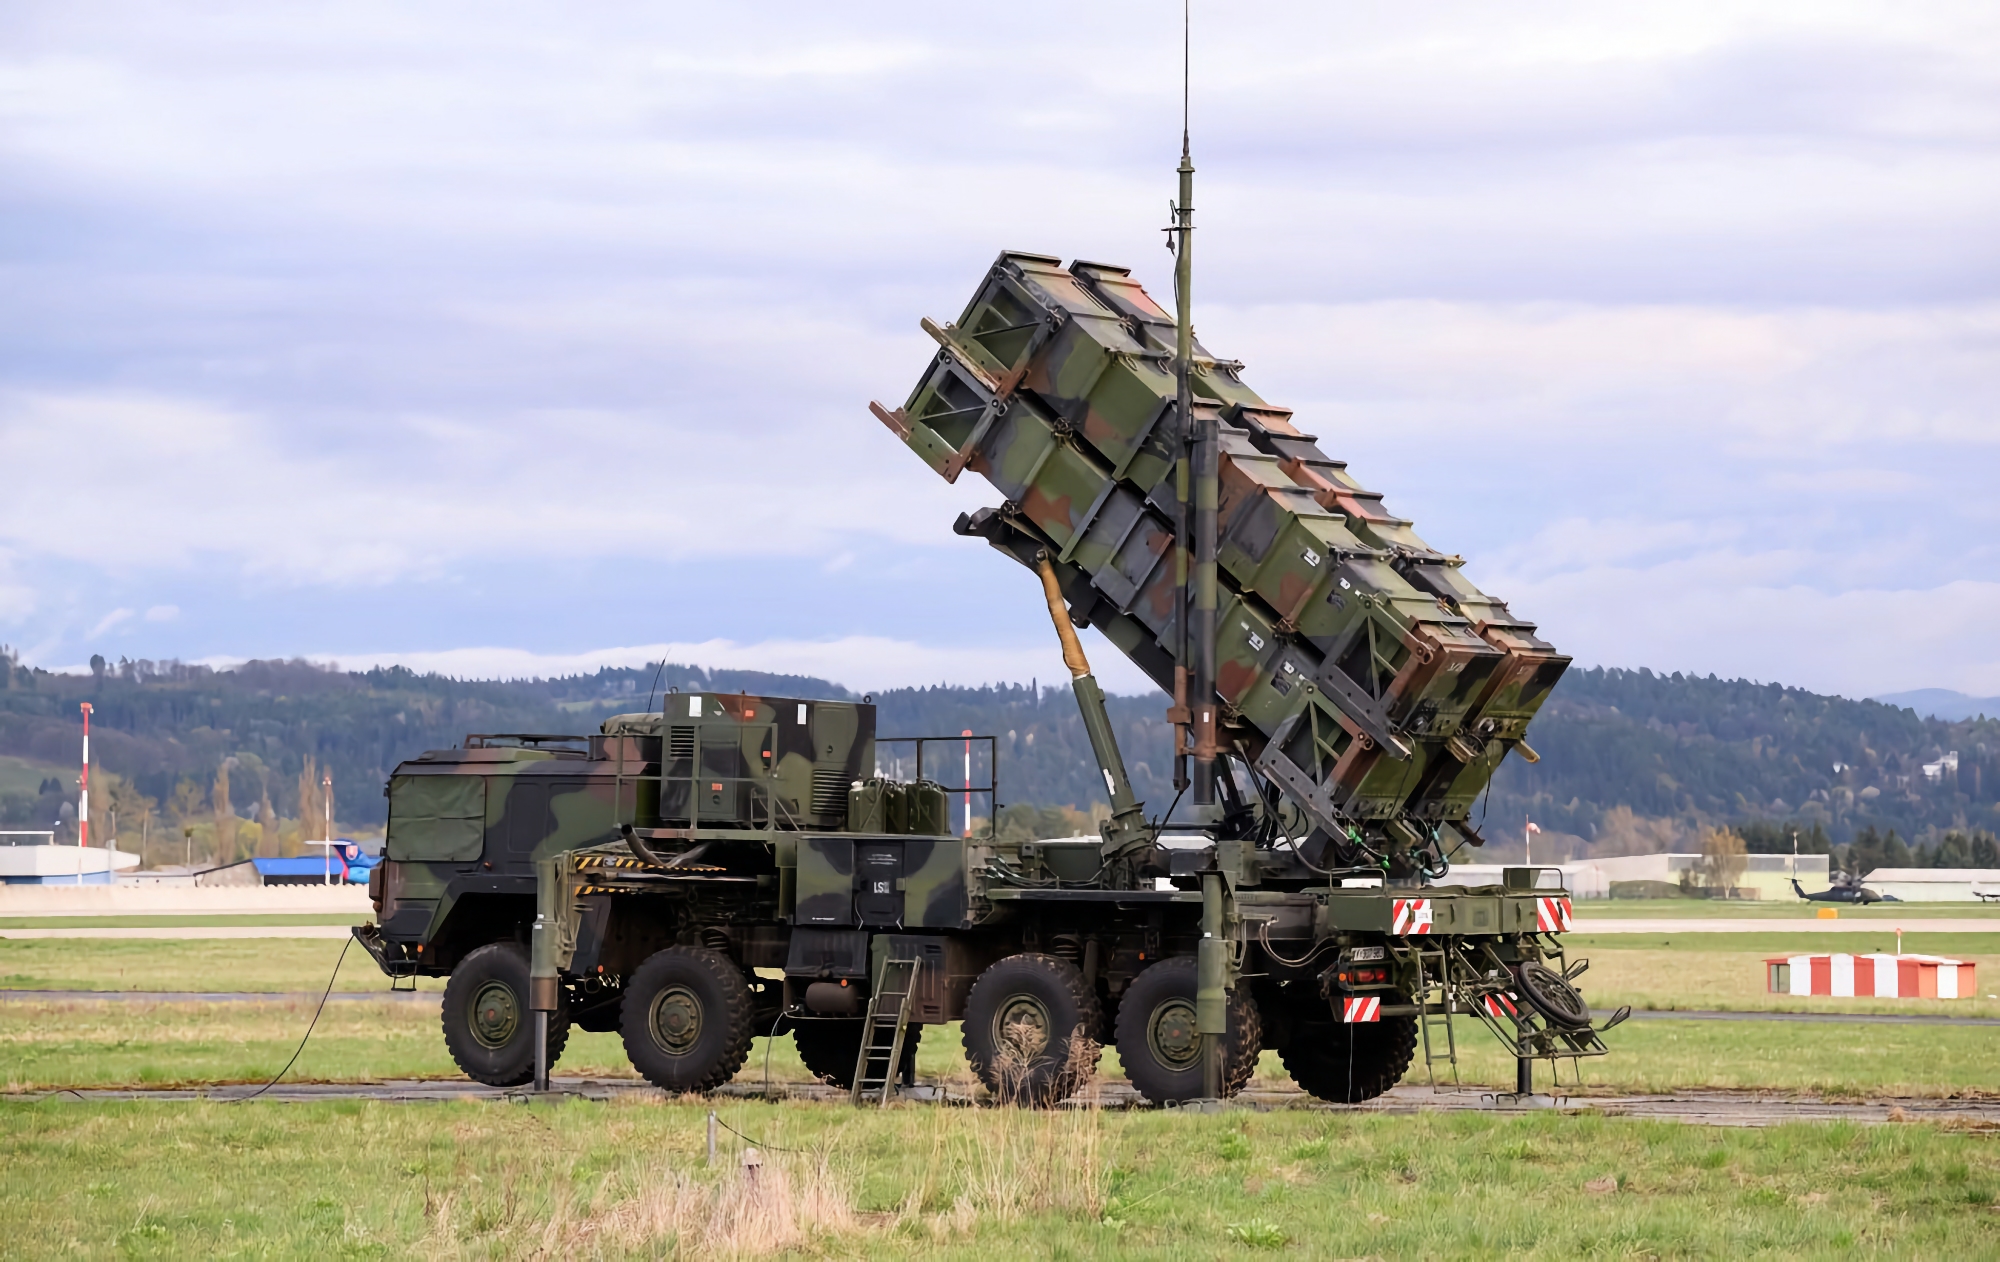 Following Germany: US and Netherlands also hand Ukraine MIM-104 Patriot SAMs, as promised 